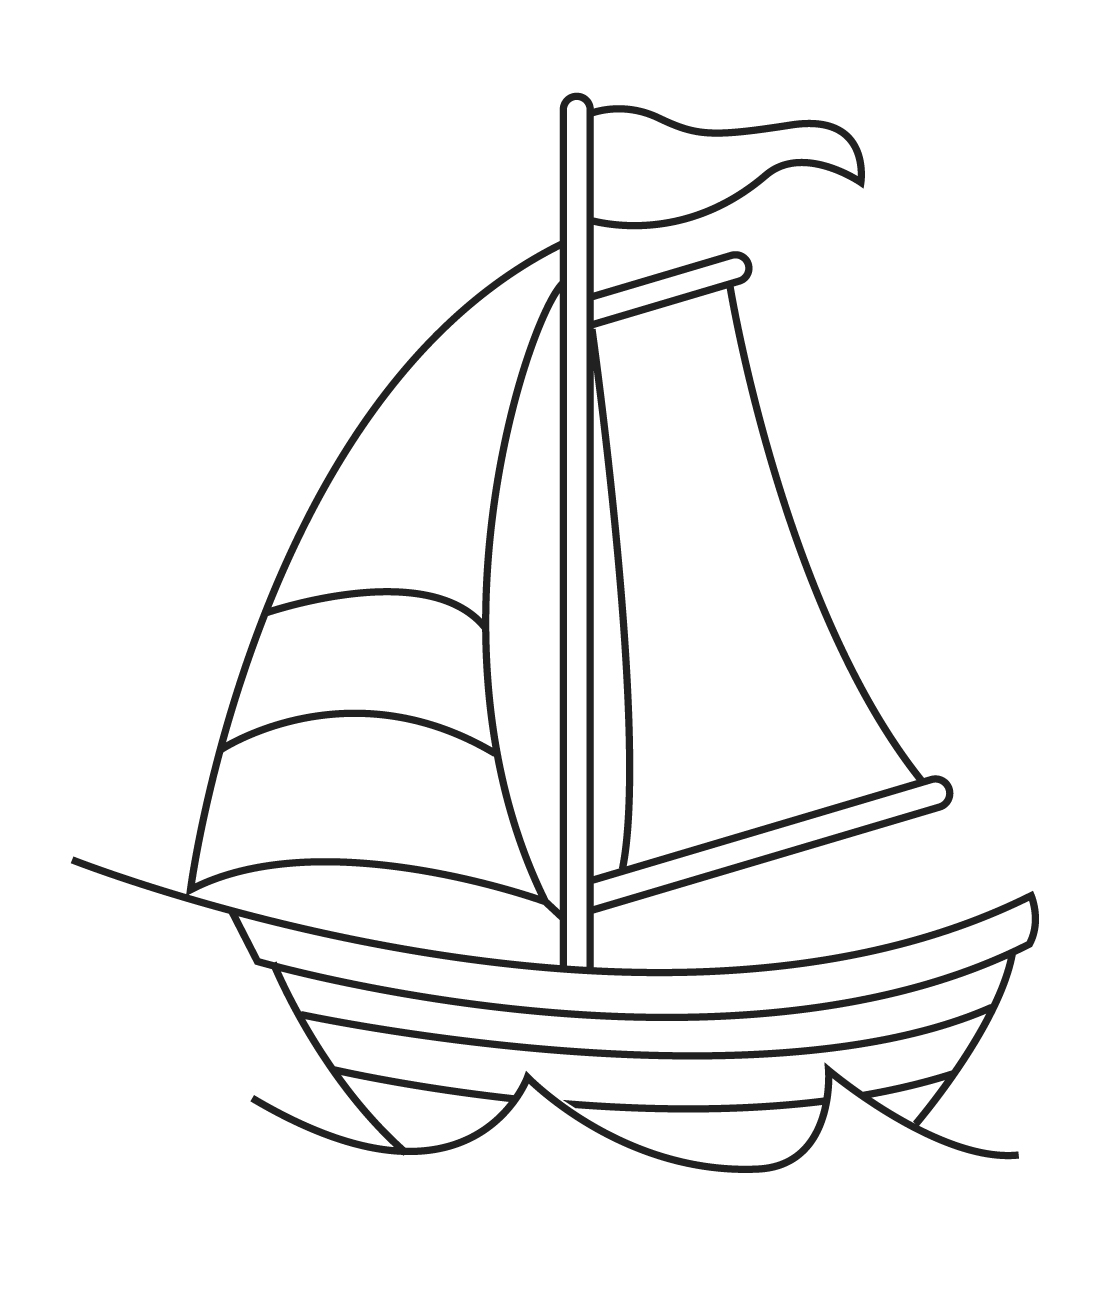 Free Simple Ship Drawing  Download Free Clip Art  Free